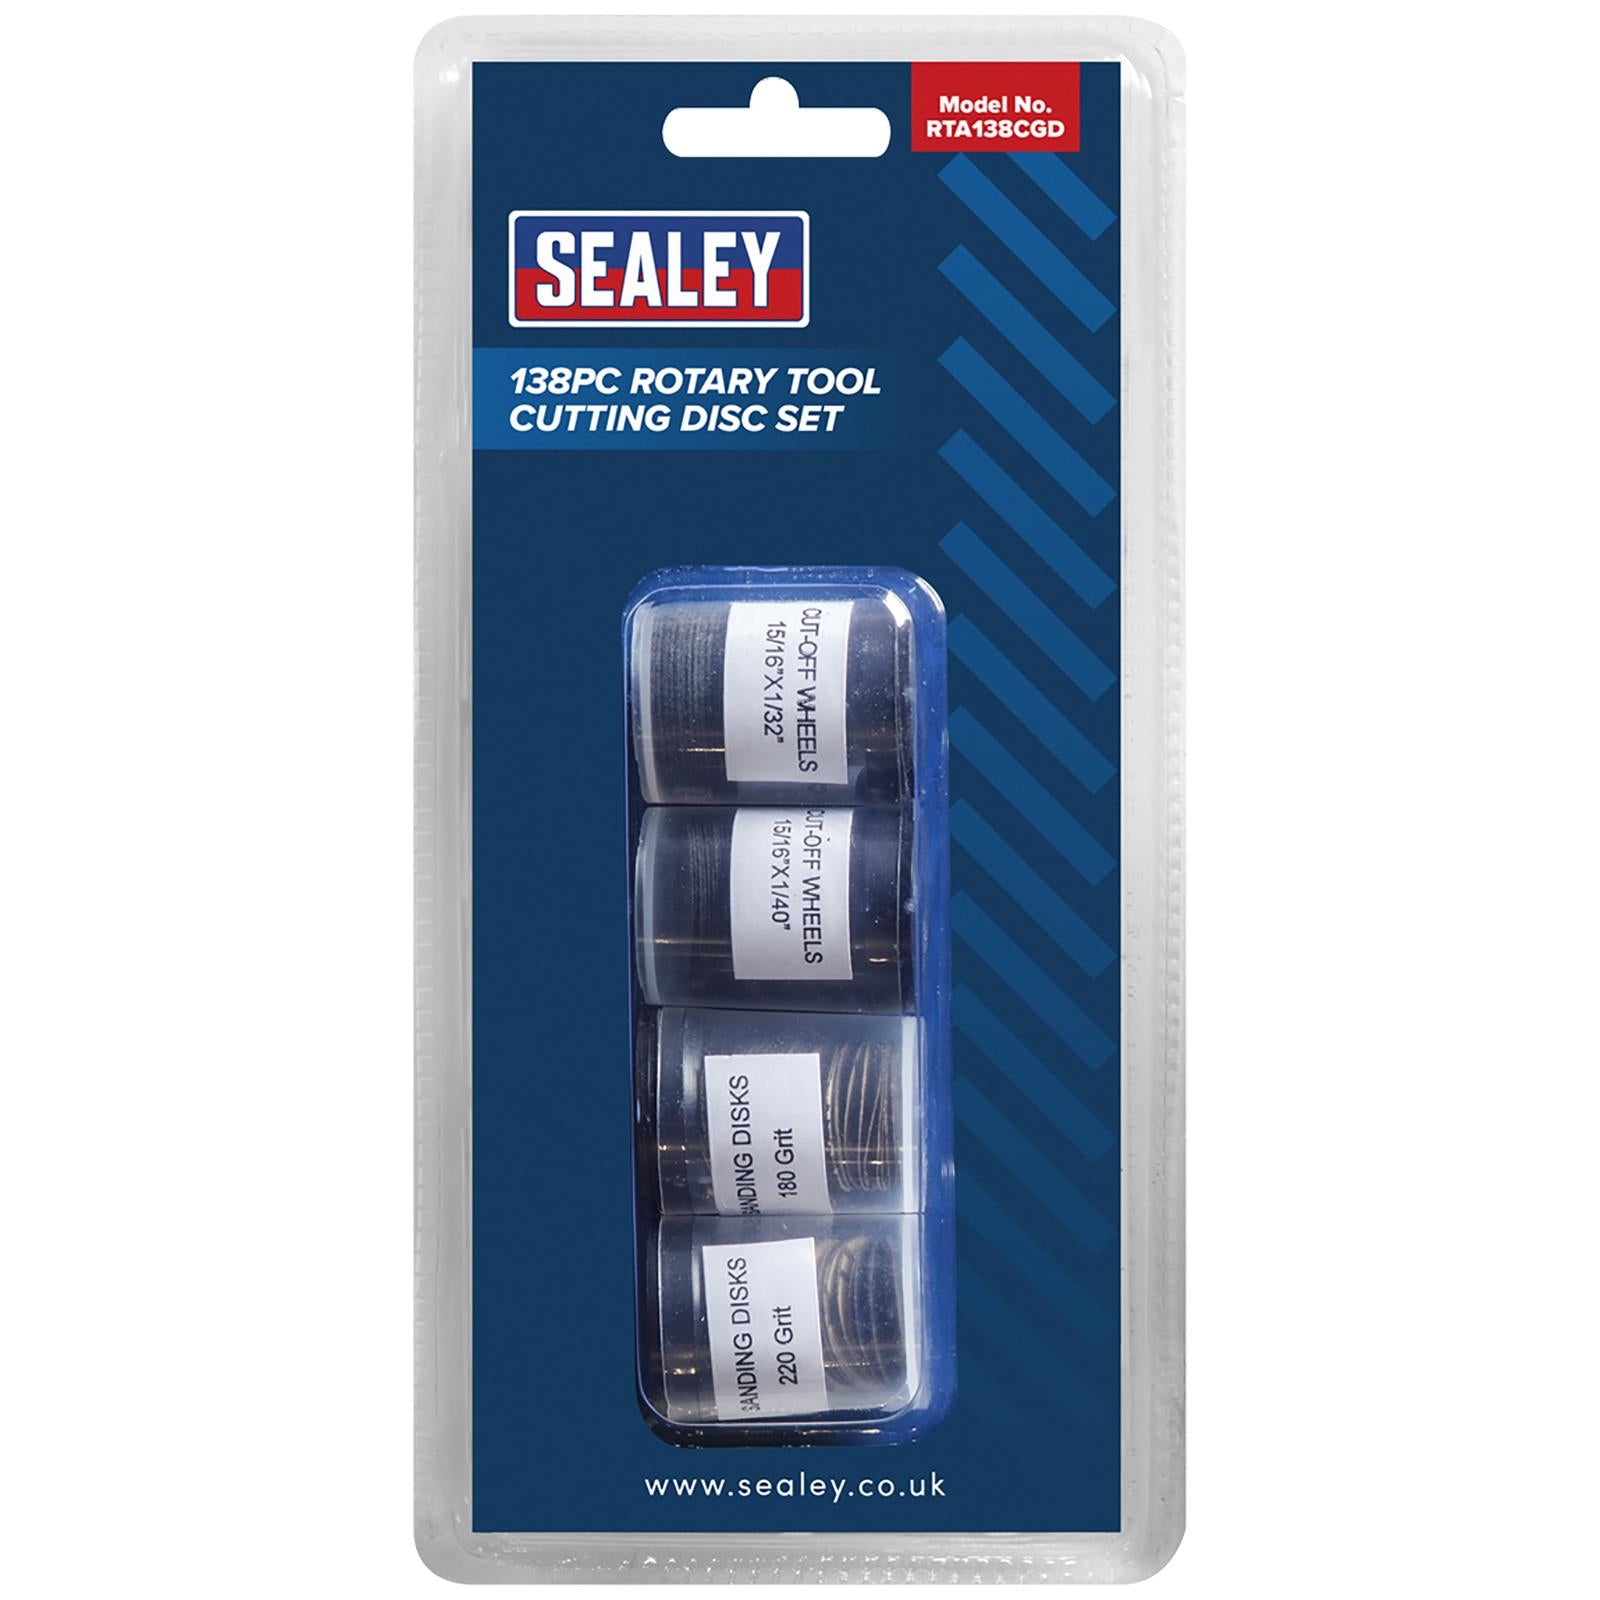 Sealey Rotary Tool Cutting Disc Set 138 Piece